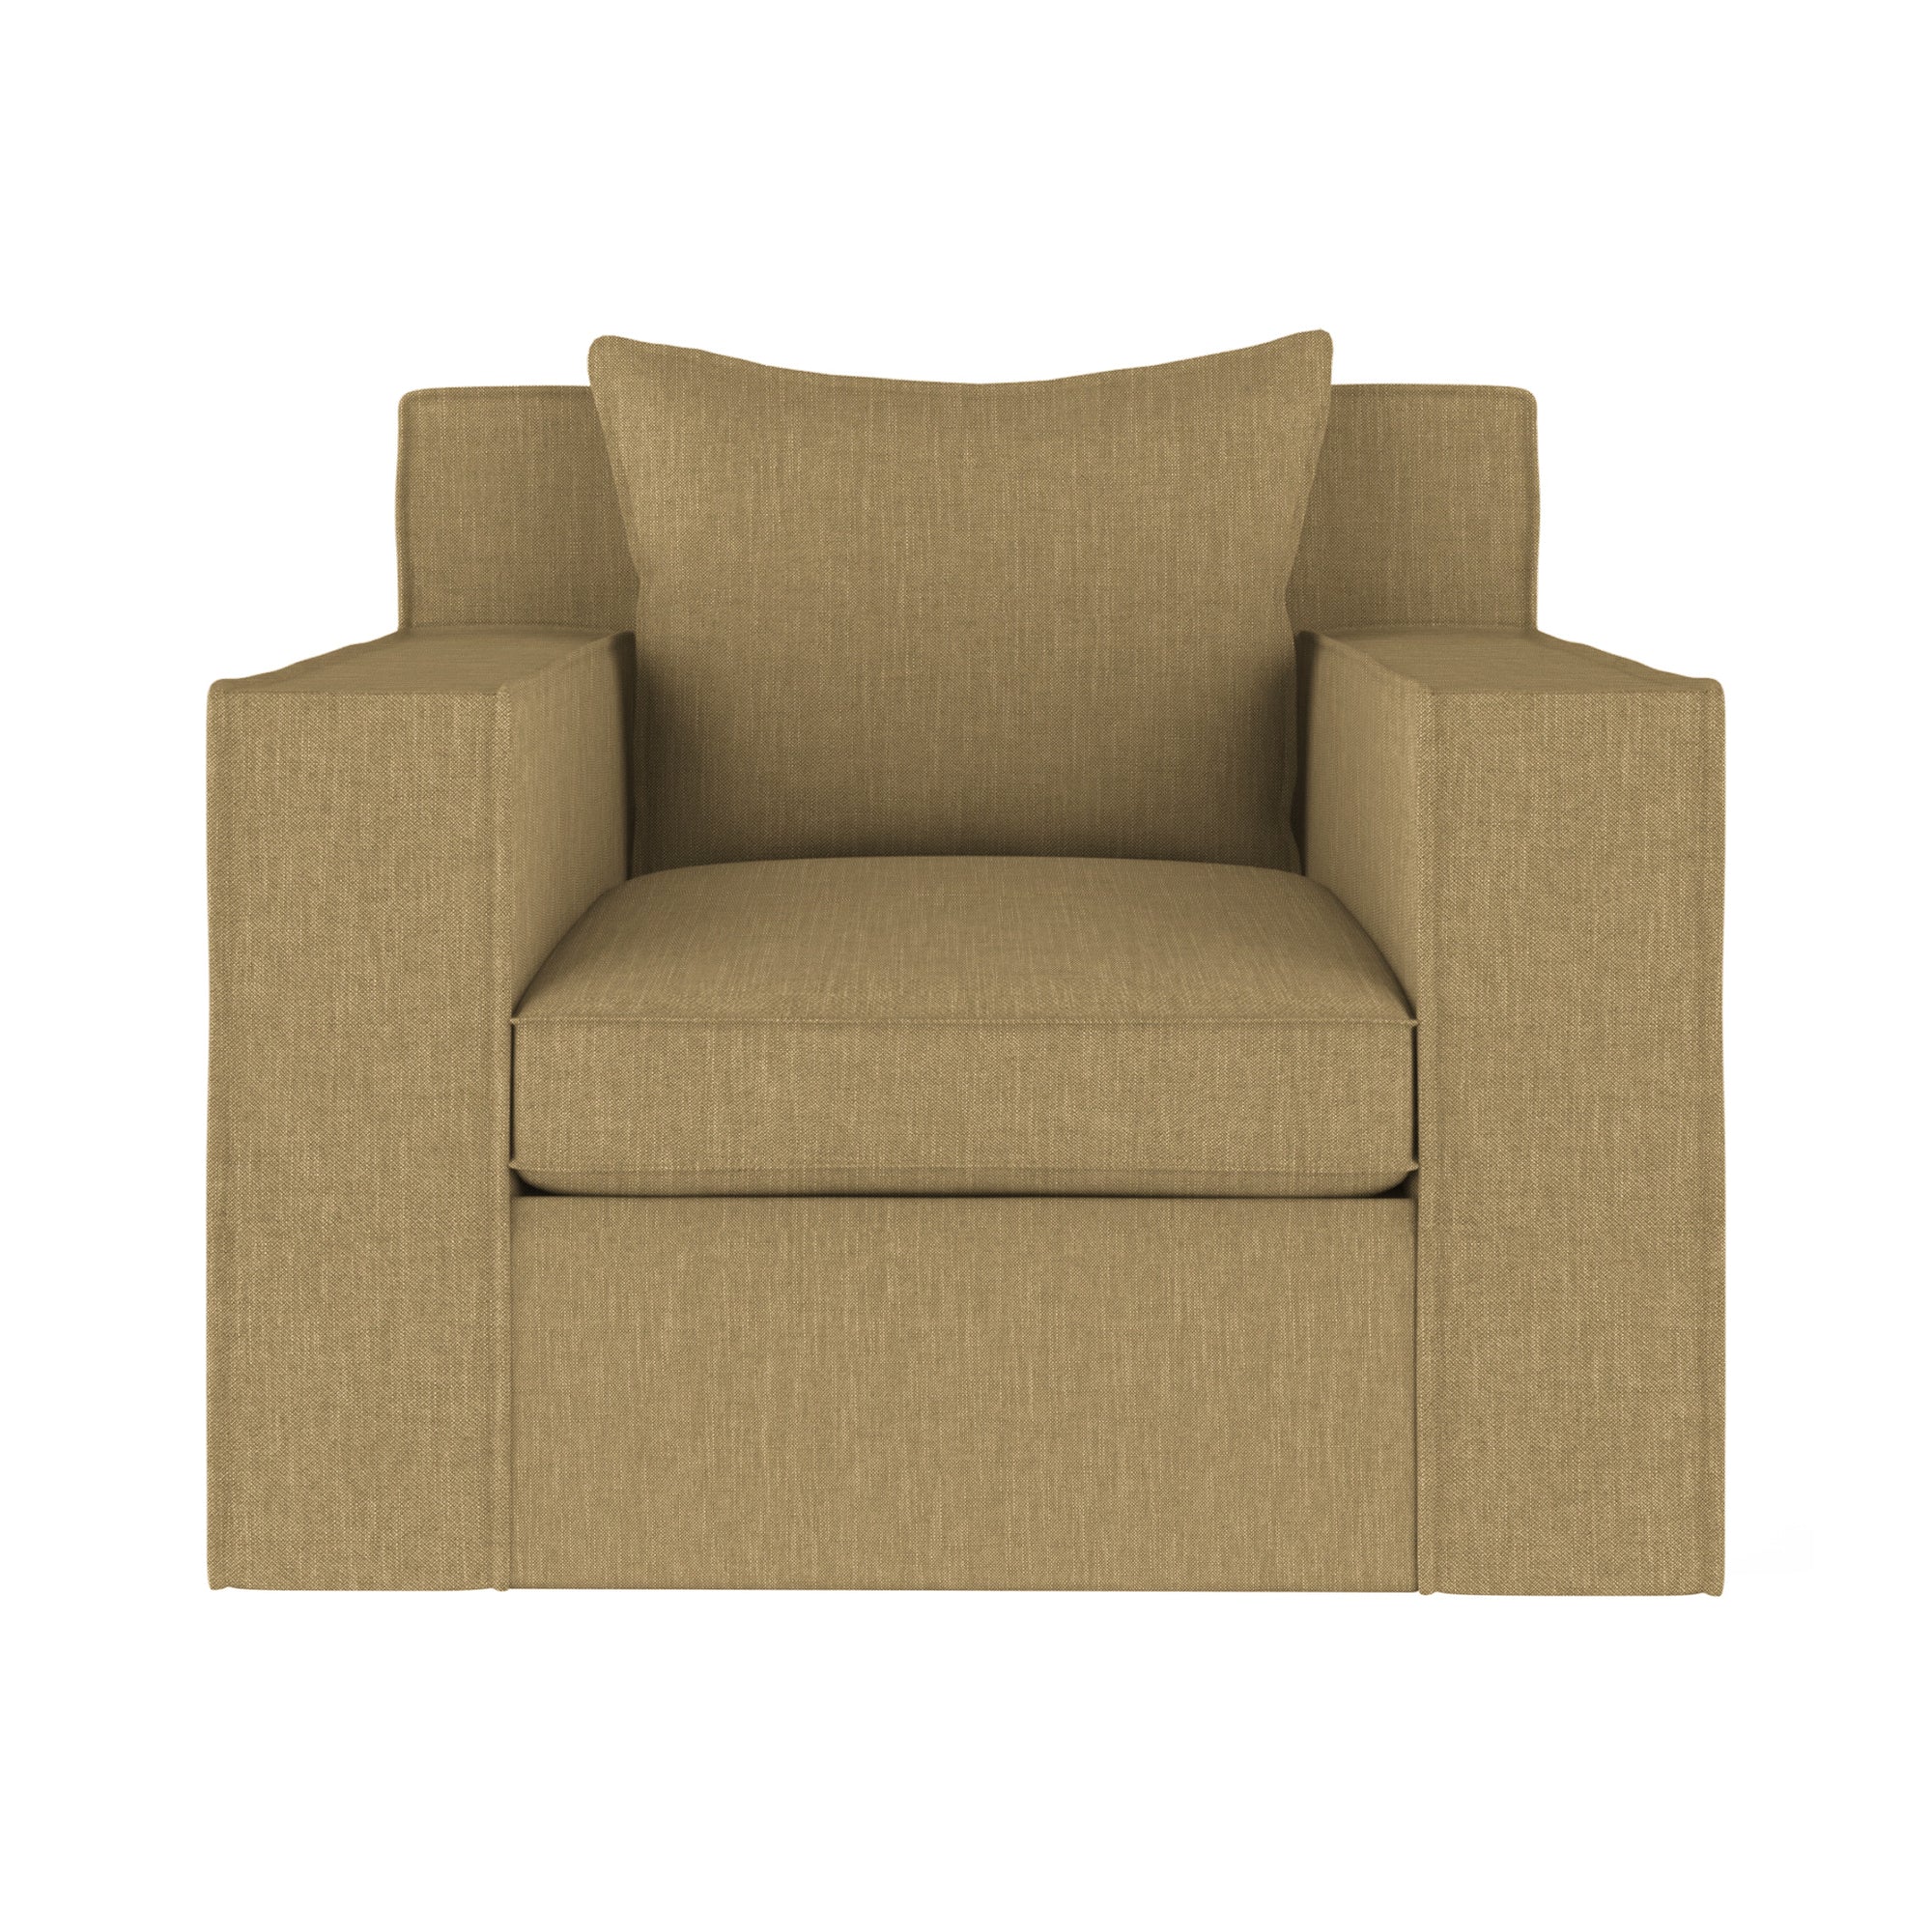 Mulberry Chair - Marzipan Box Weave Linen